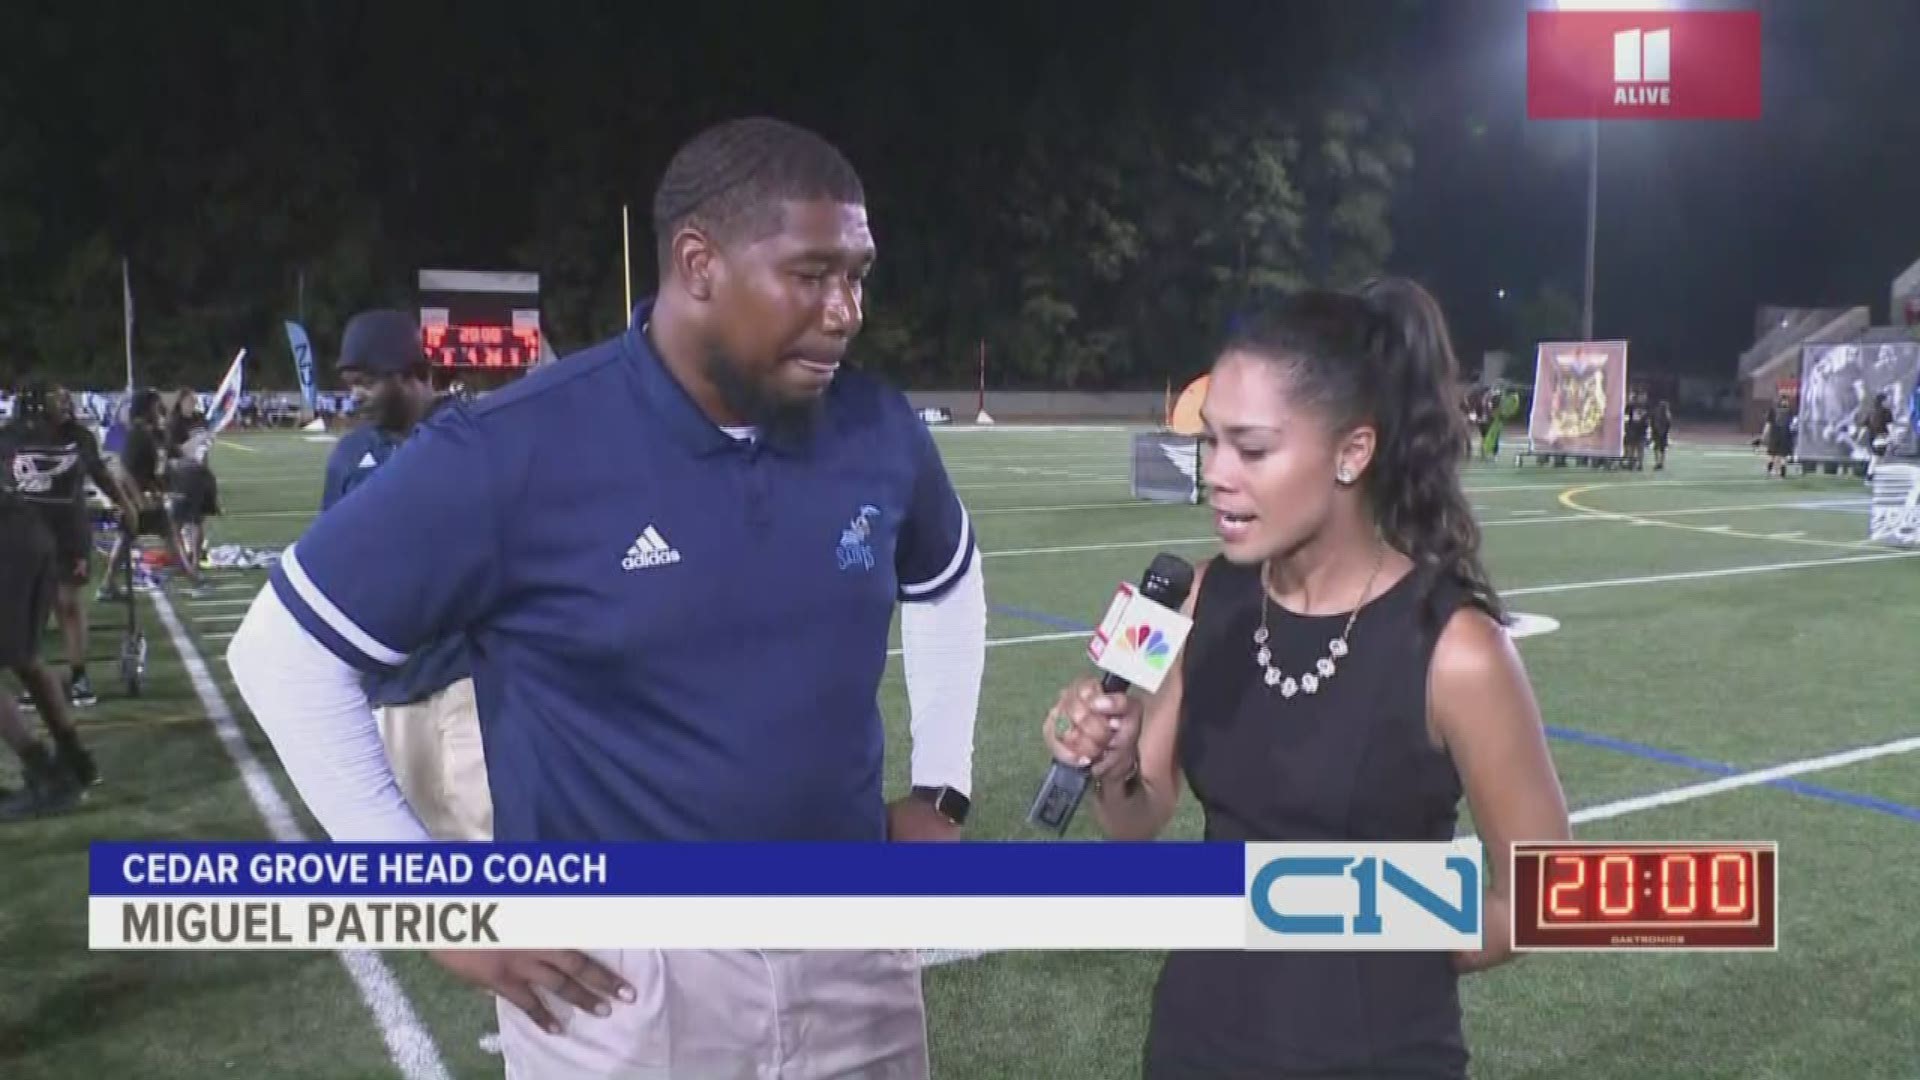 'This is big time': Cedar Grove head coach Miguel Patrick at halftime in the Cam Newton C1N Football Showcase against Central (Phenix City, Ala.)